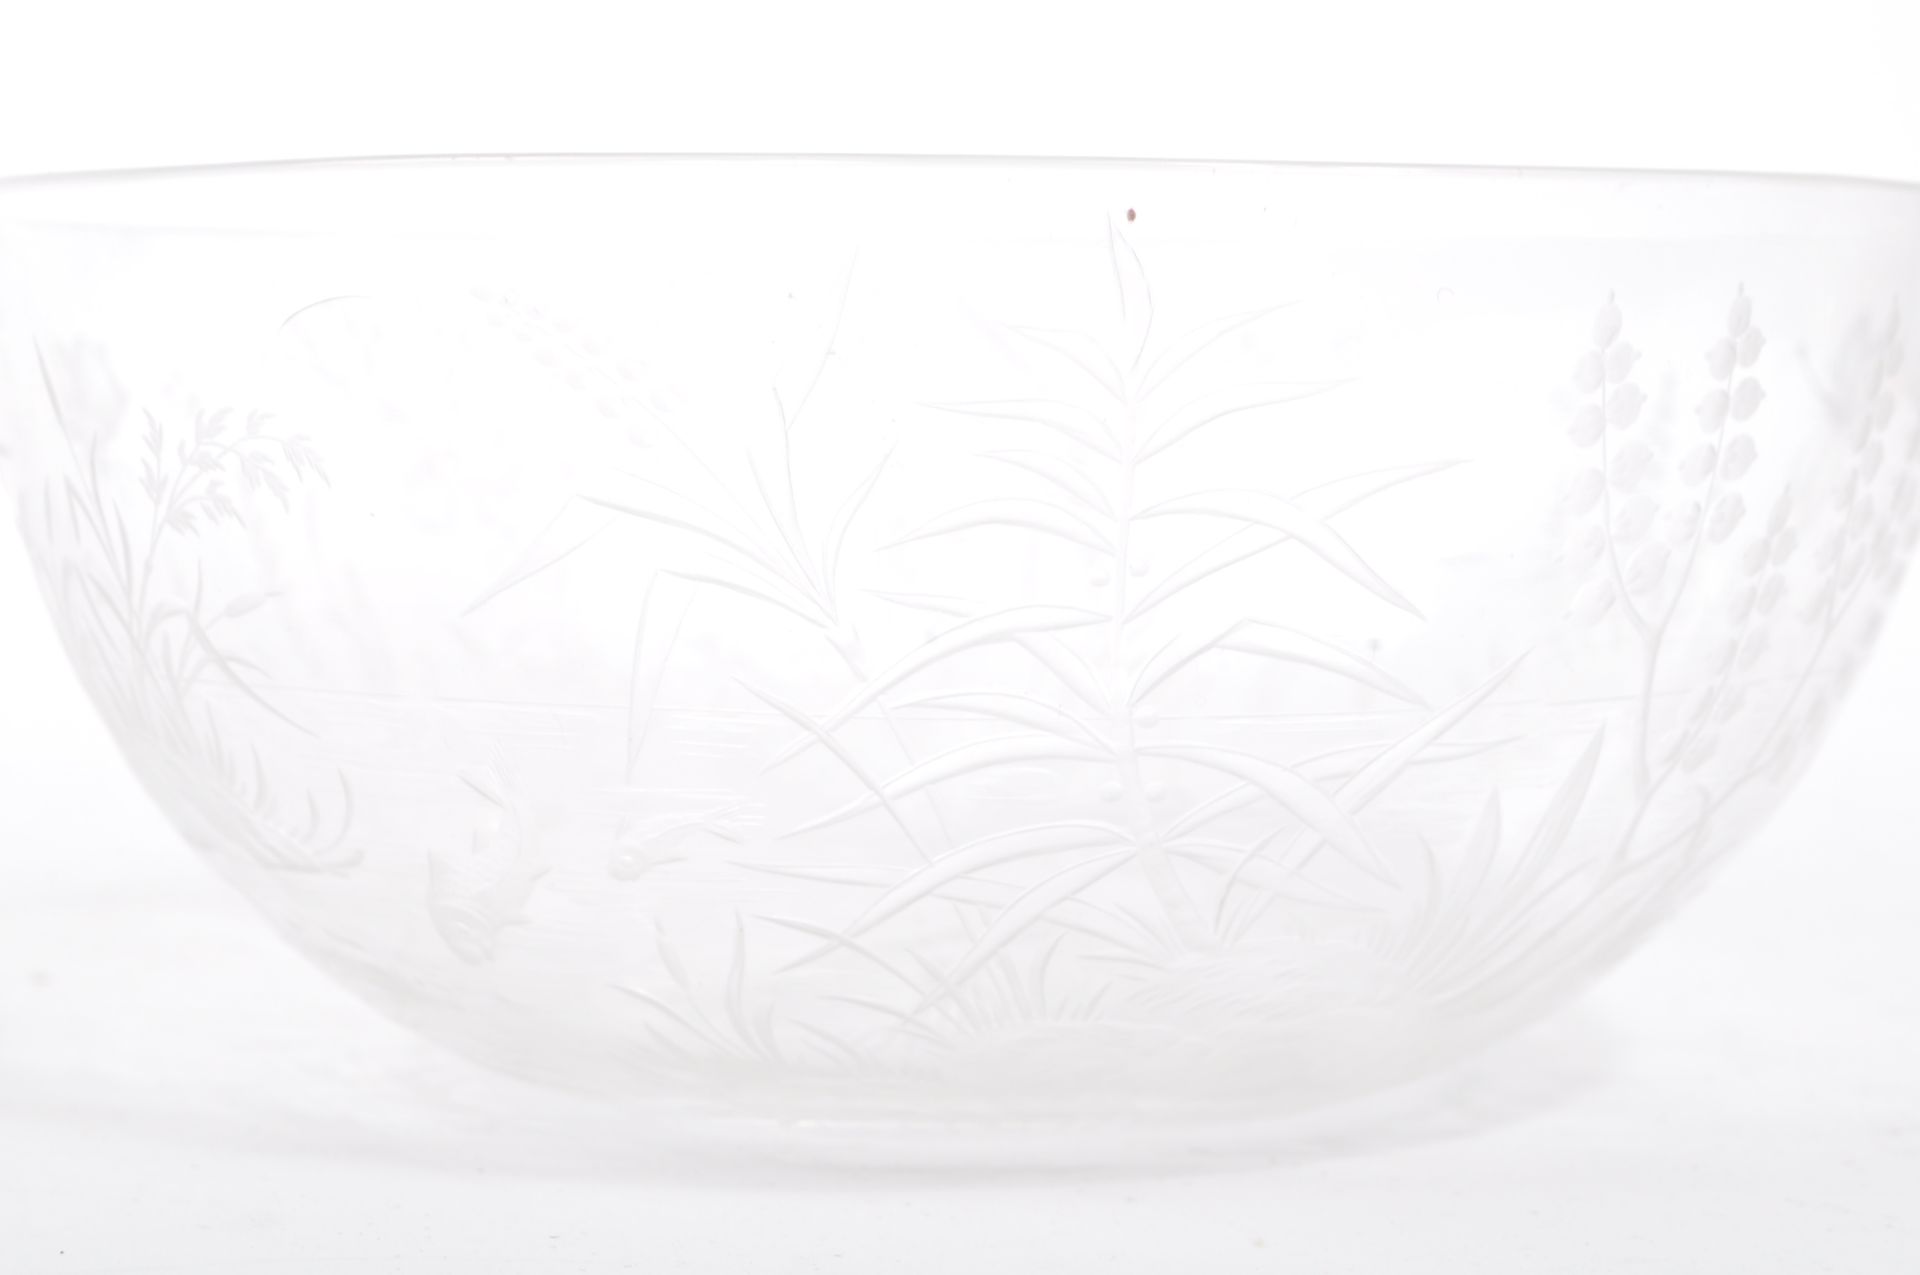 EARLY 20TH CENTURY ETCHED CHINOISERIE GLASS DISH - Image 4 of 6